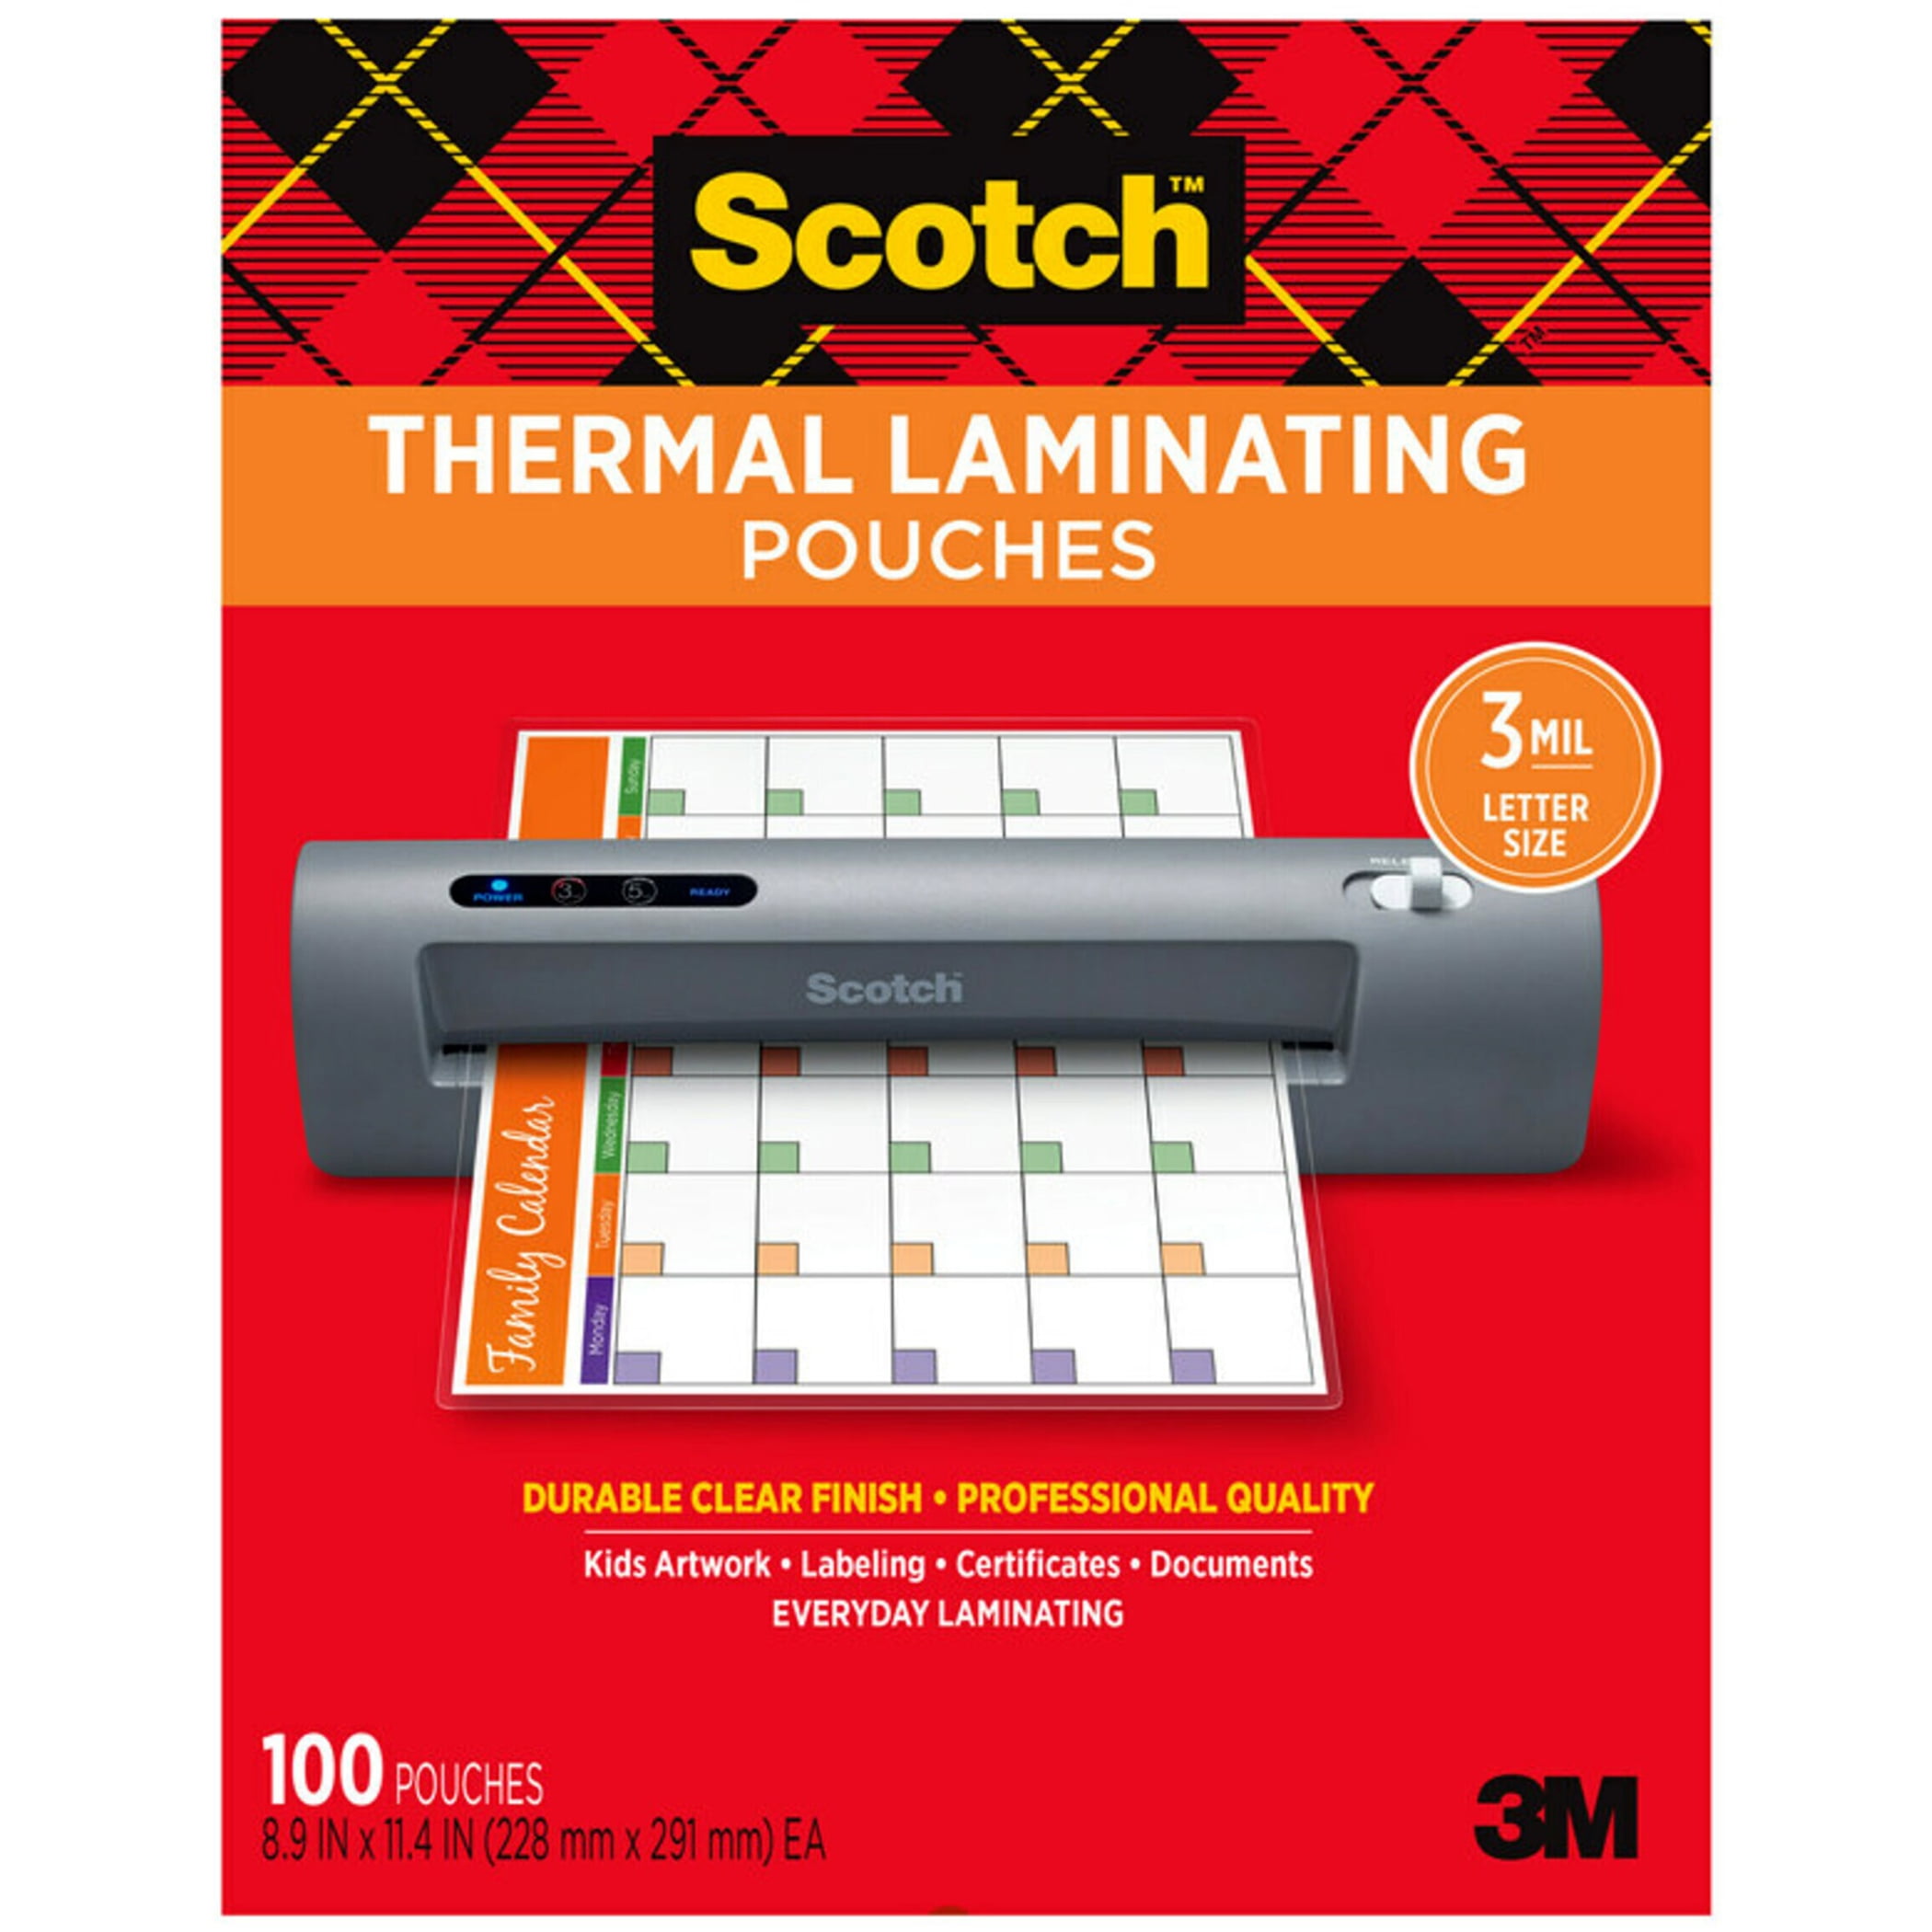 Scotch Thermal Laminating Pouches, 100 Count, 8.5 x 11, 3 mil Thick